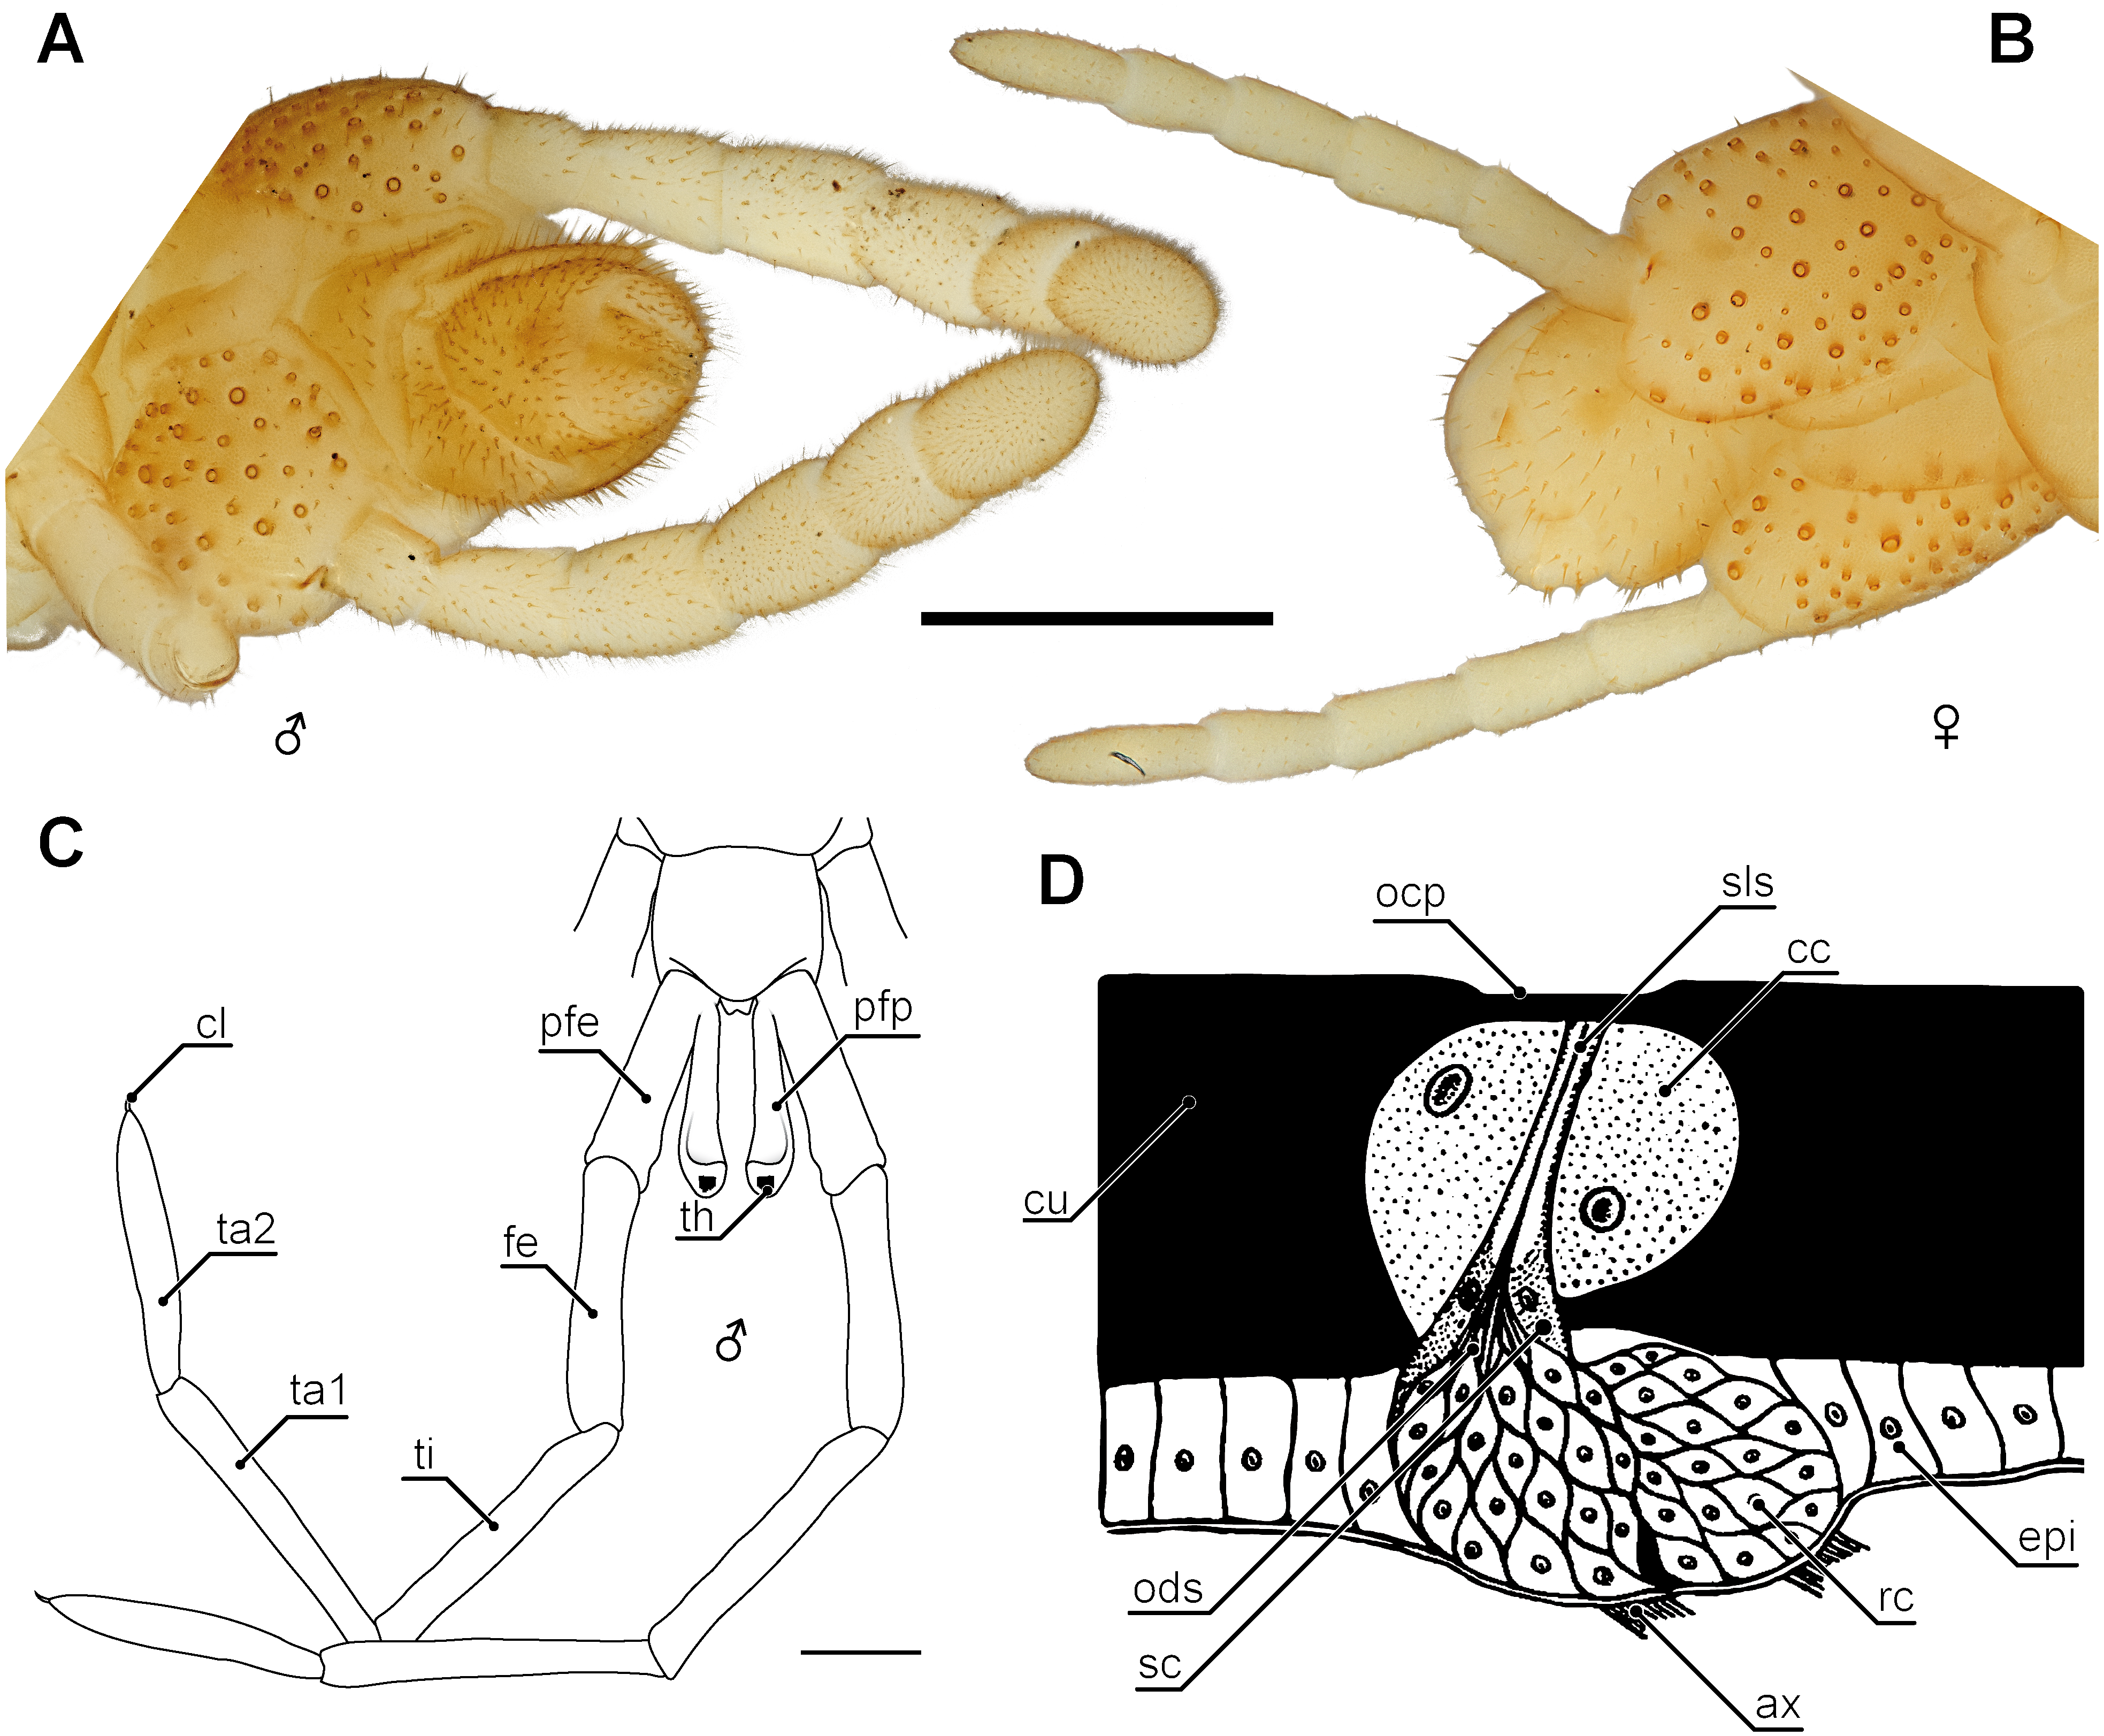 The ultimate legs of Chilopoda (Myriapoda) a review on their morphological disparity and functional variability PeerJ photo